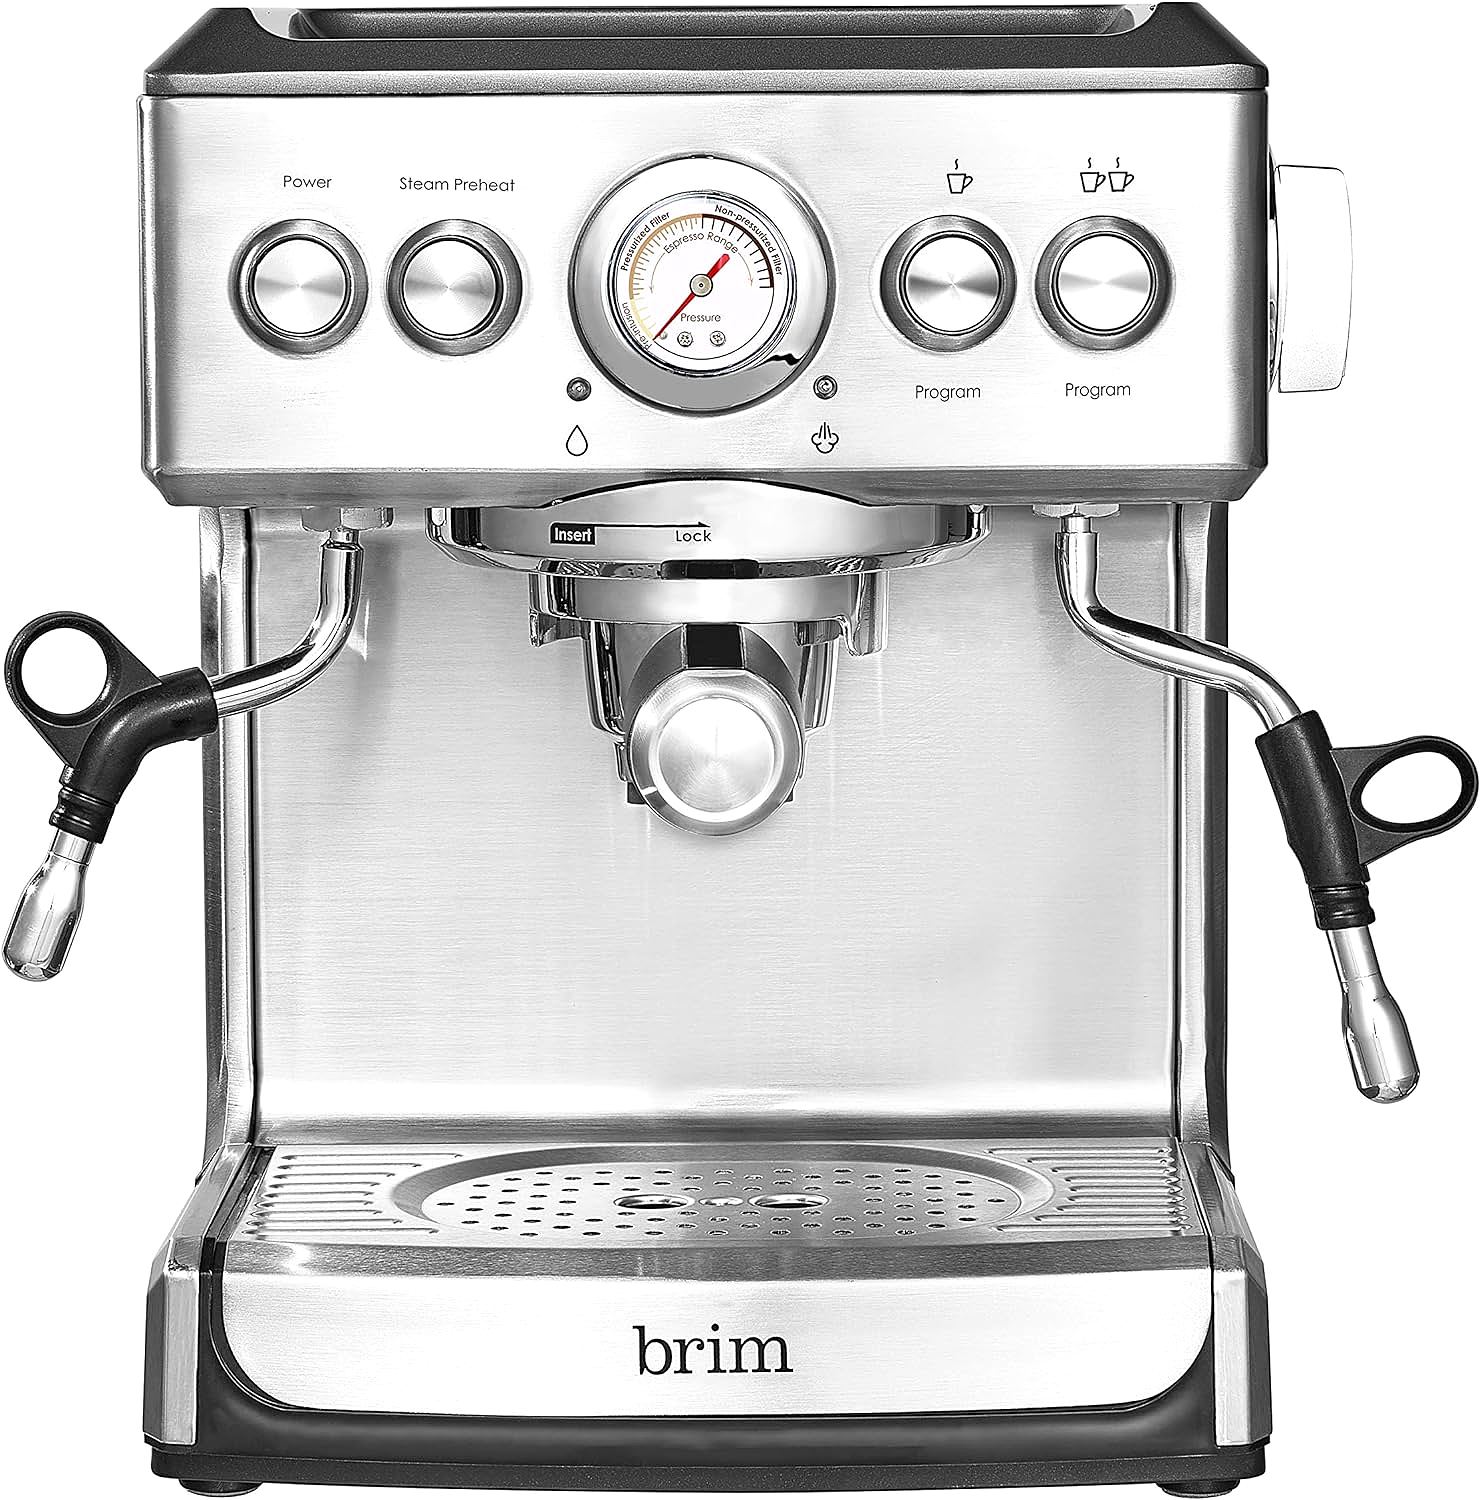 Brim 50019 19 Bar Espresso Machine: A Feature-Packed Option for At-Home Baristas